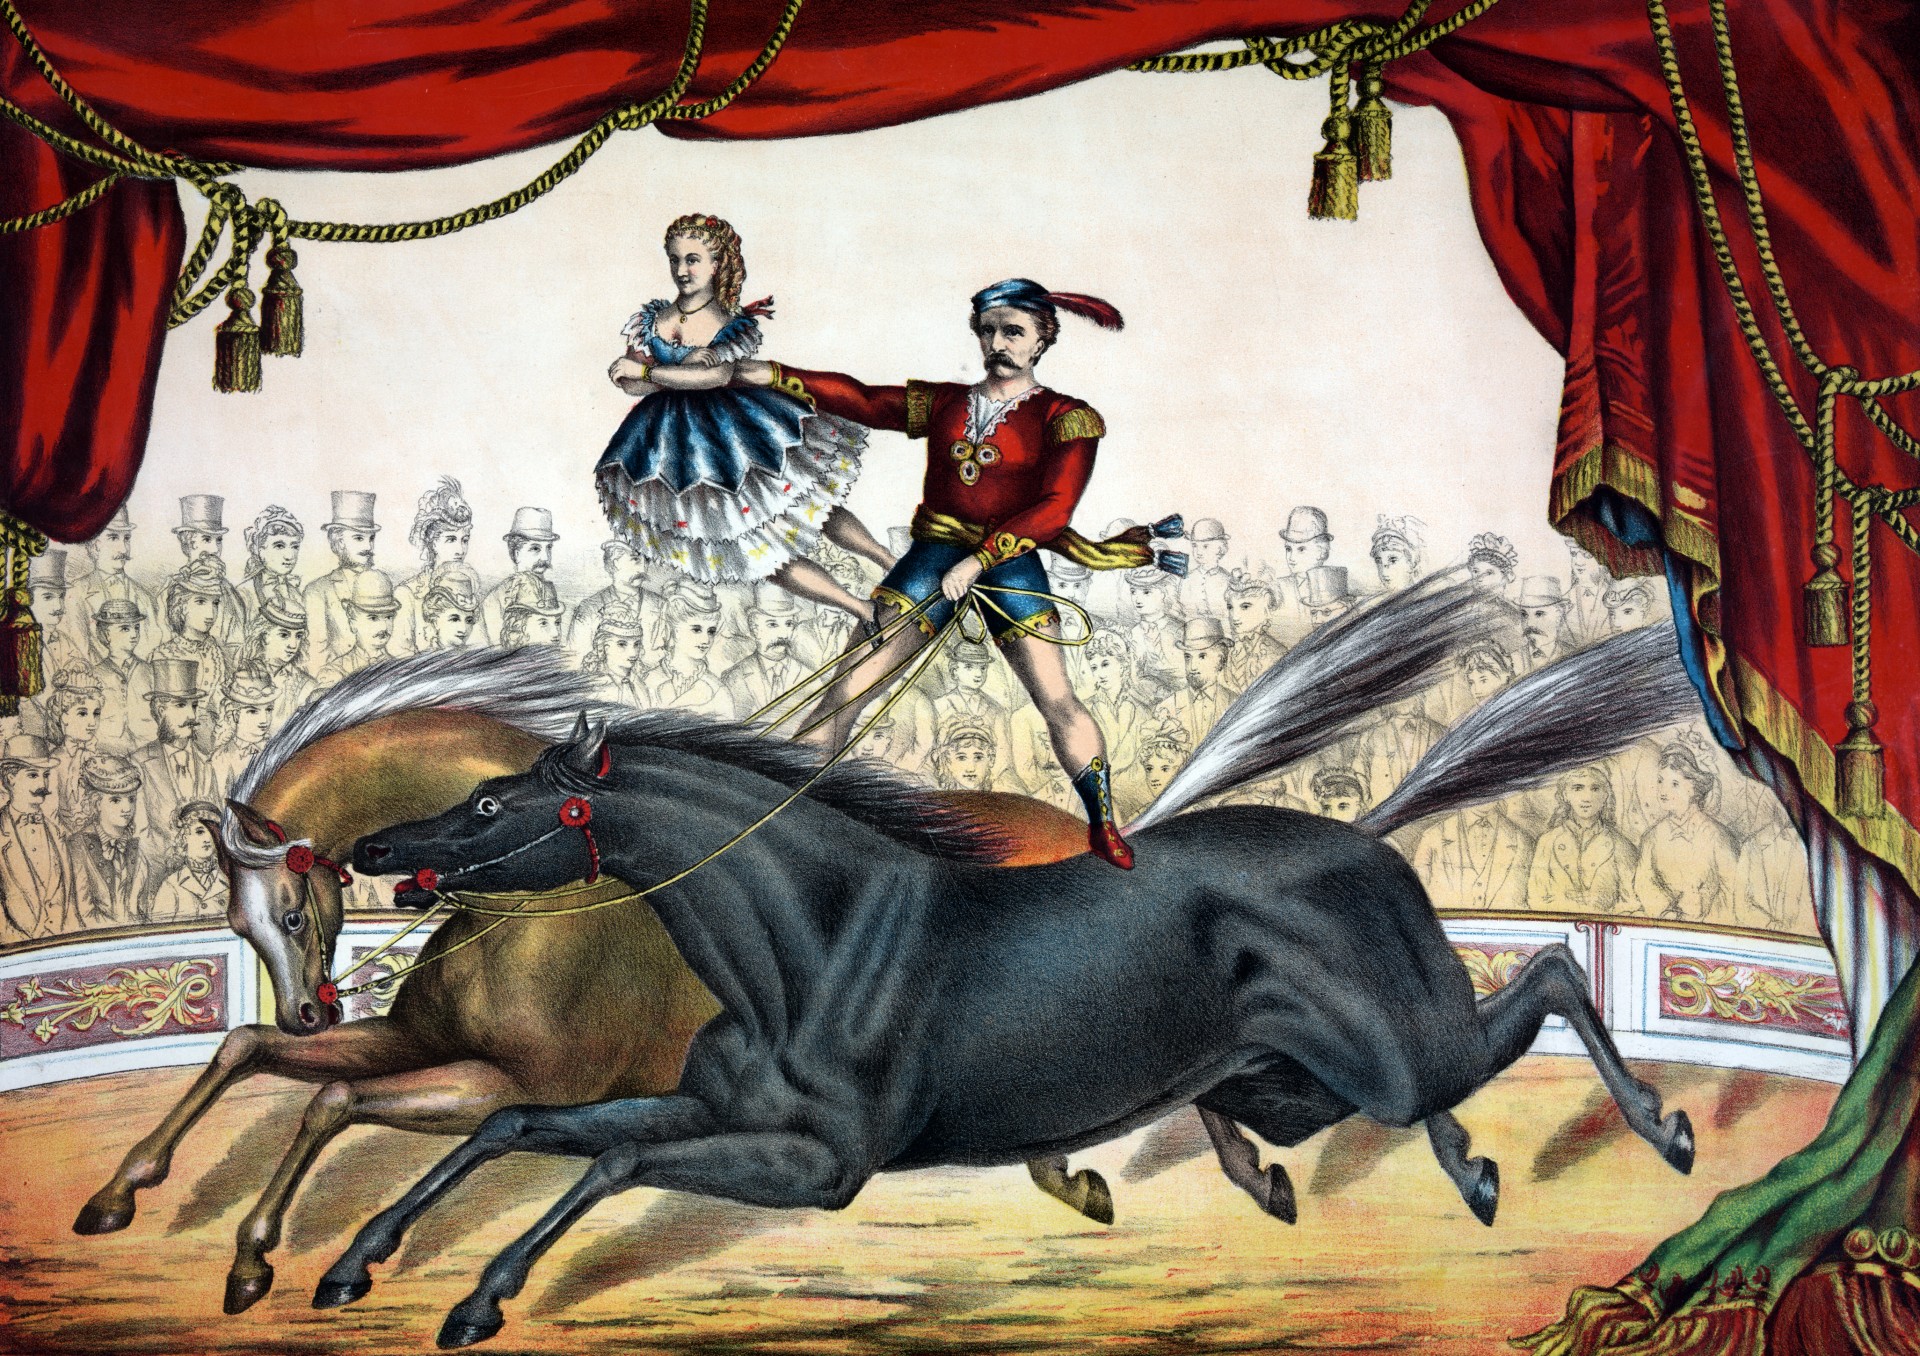 Horse Circus Act Painting